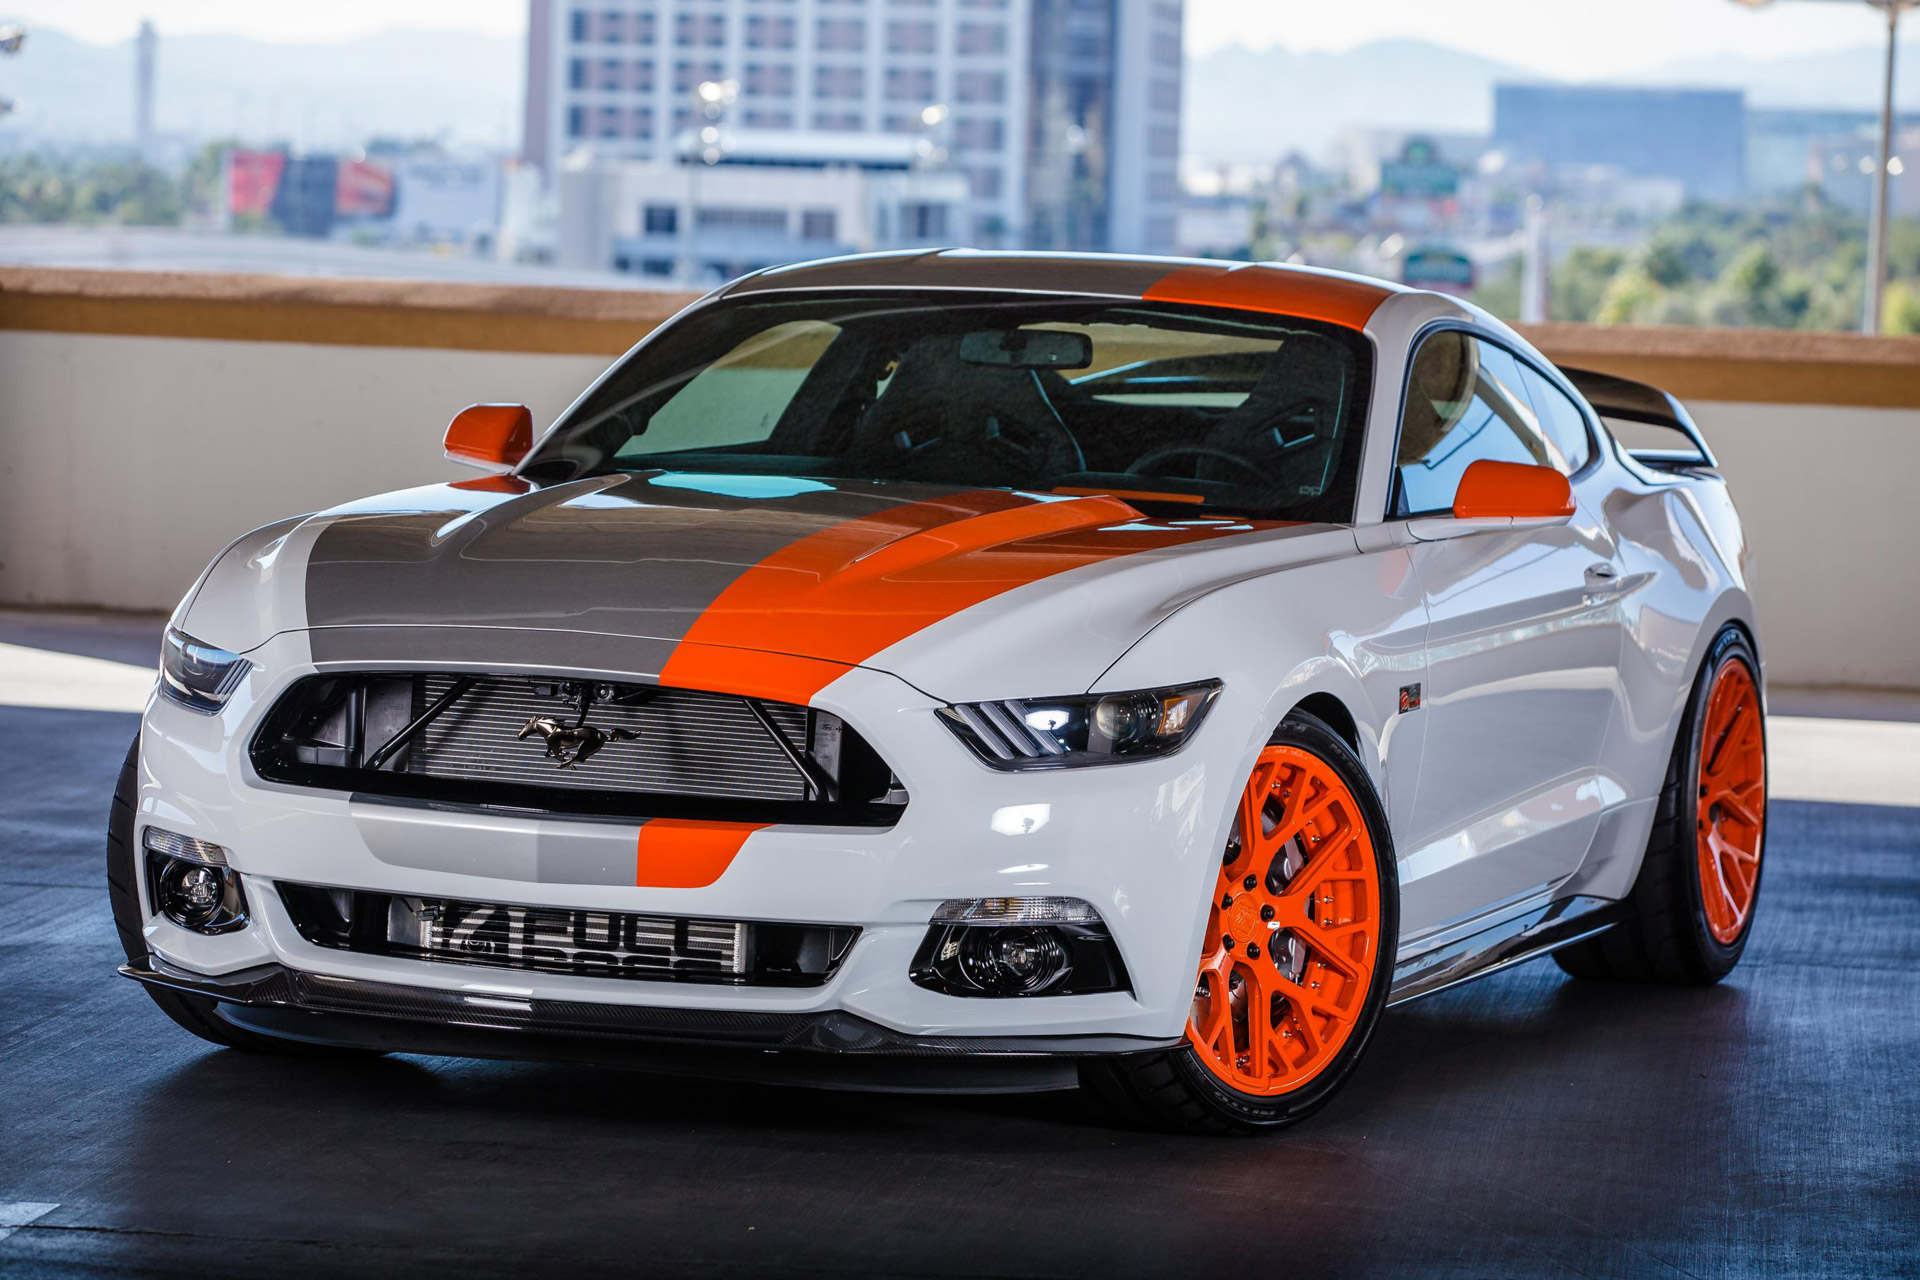 Mustang Of The Day: 2016 Ford Mustang By Bojix Design